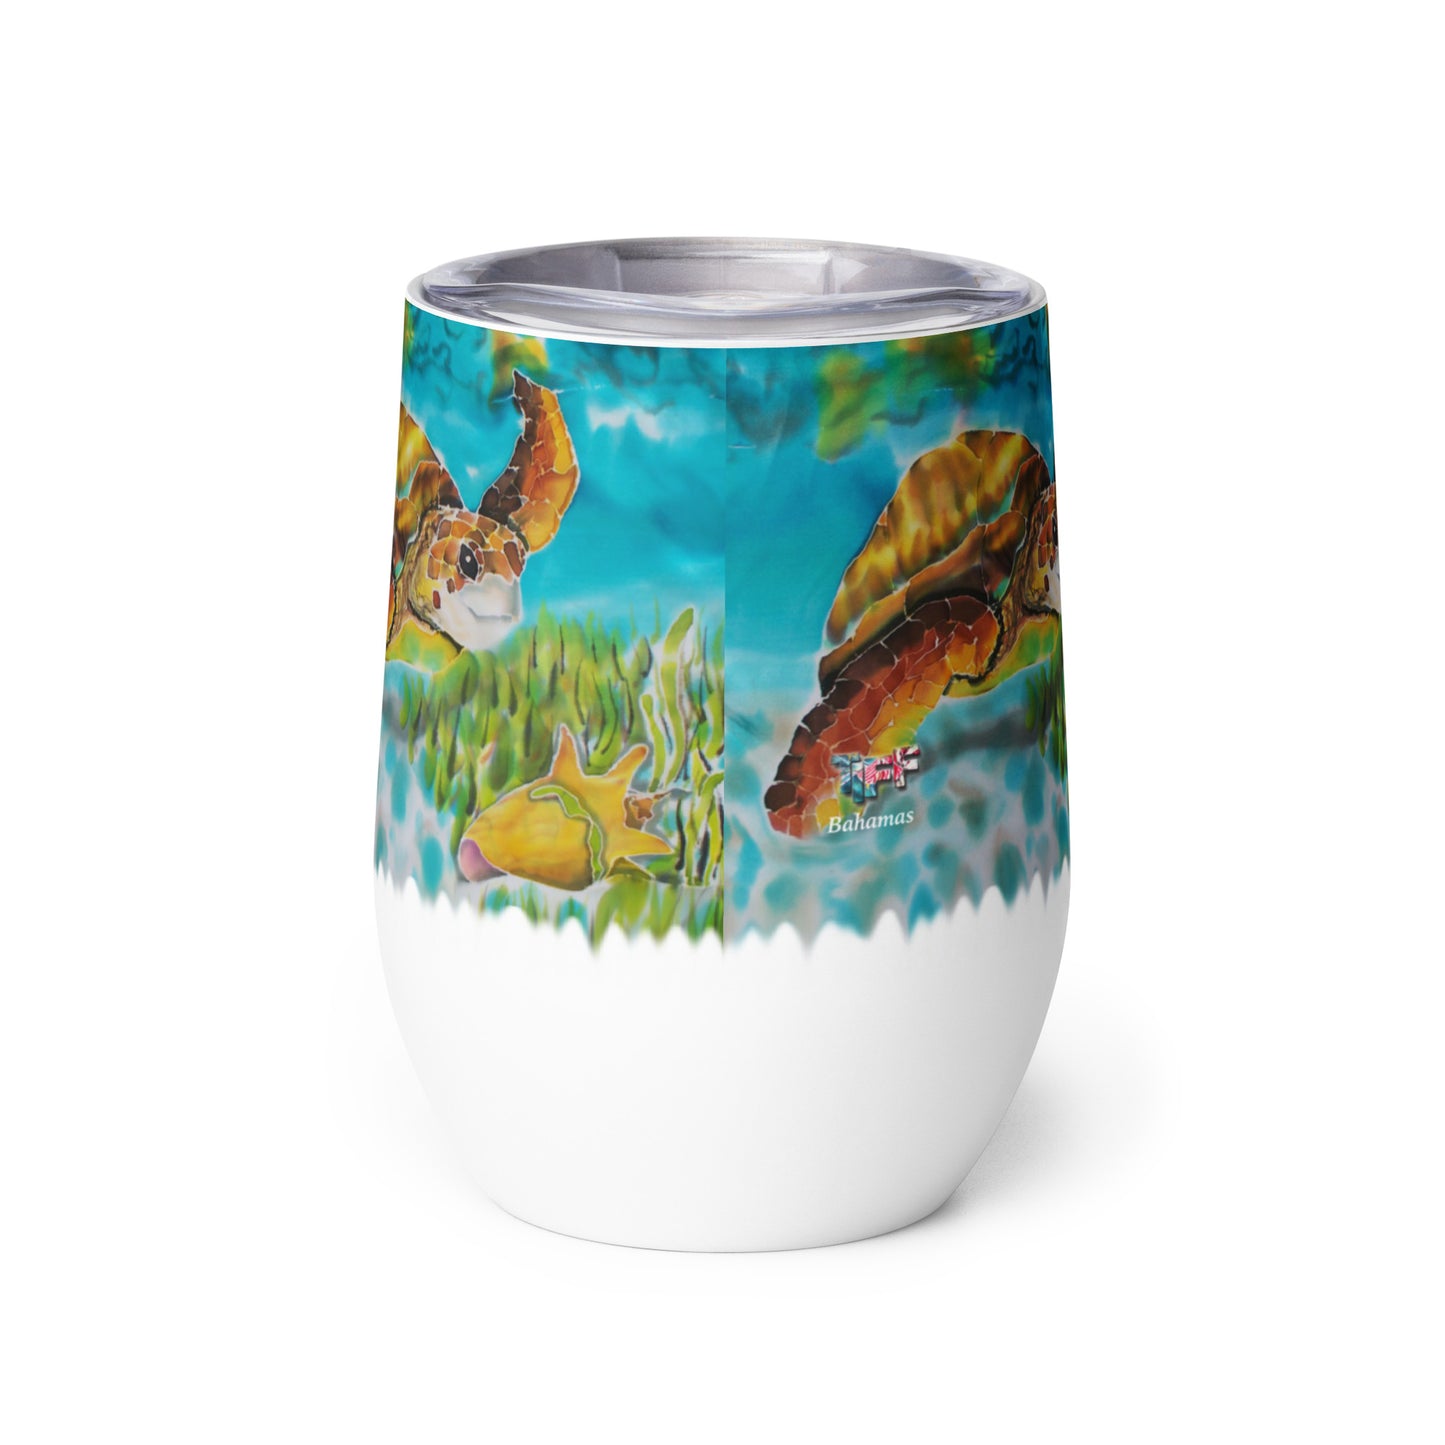 Diving Conch Wine tumbler